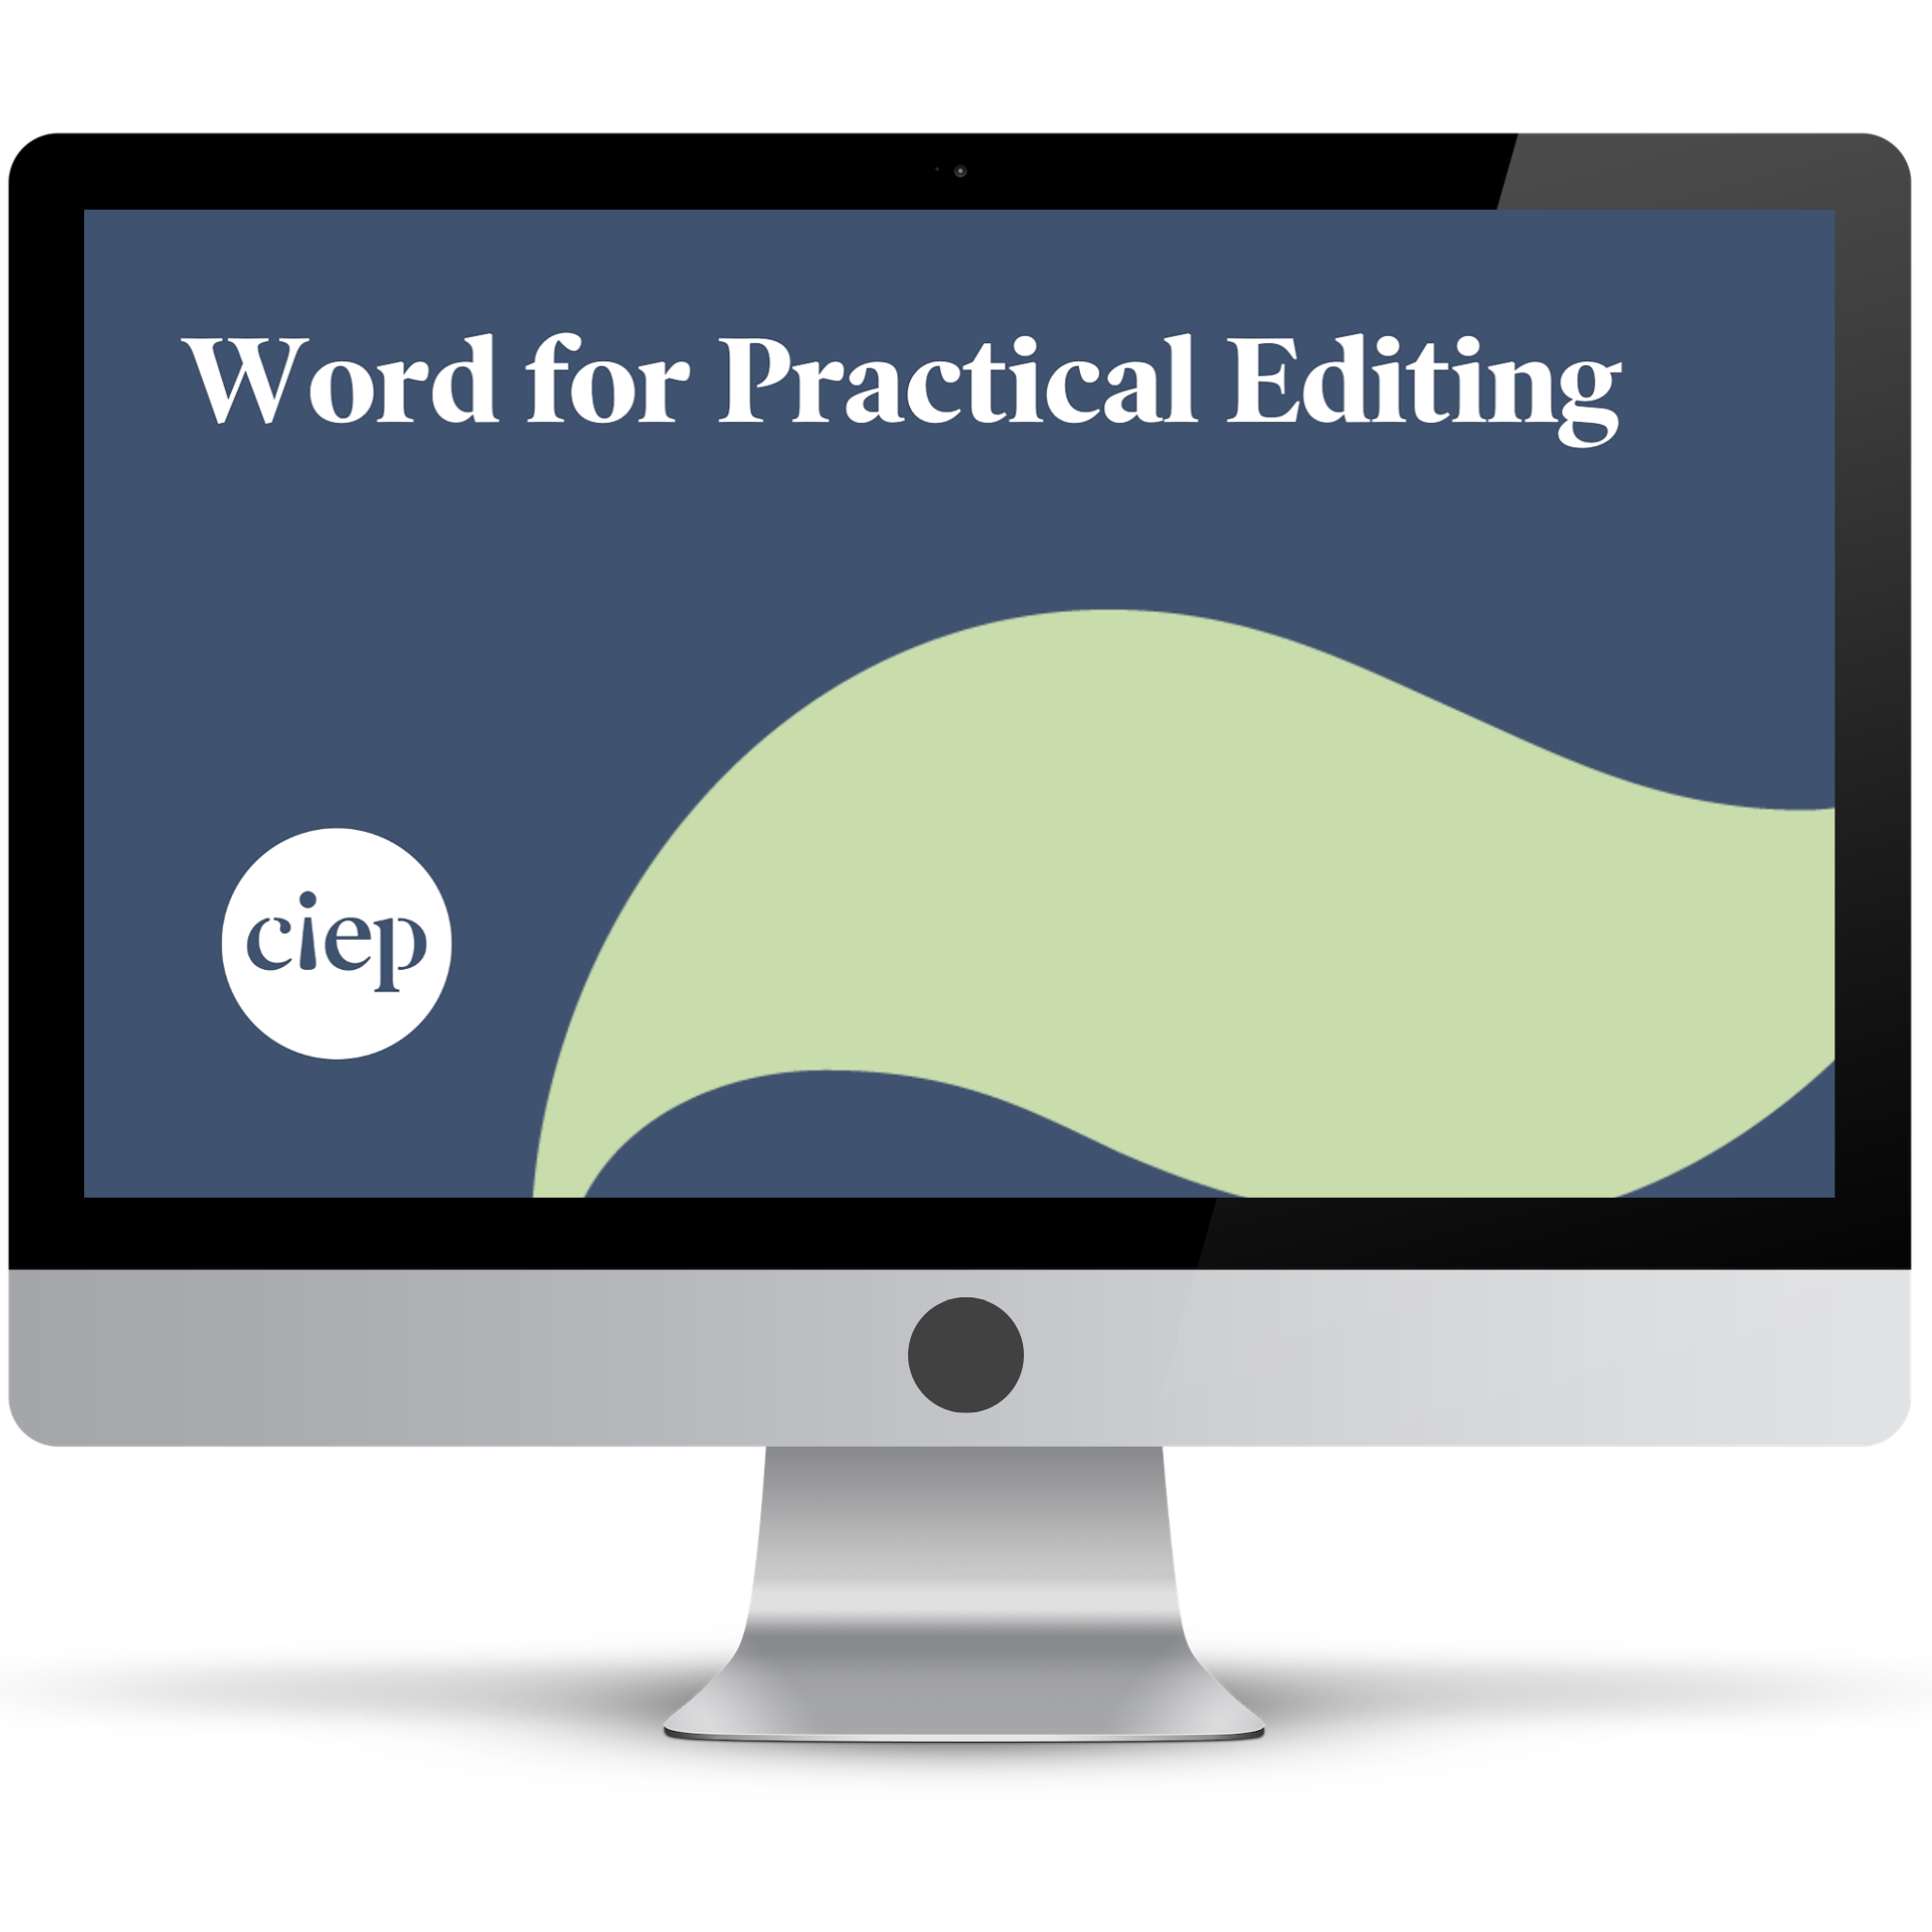 word-for-practical-editing-chartered-institute-of-editing-and